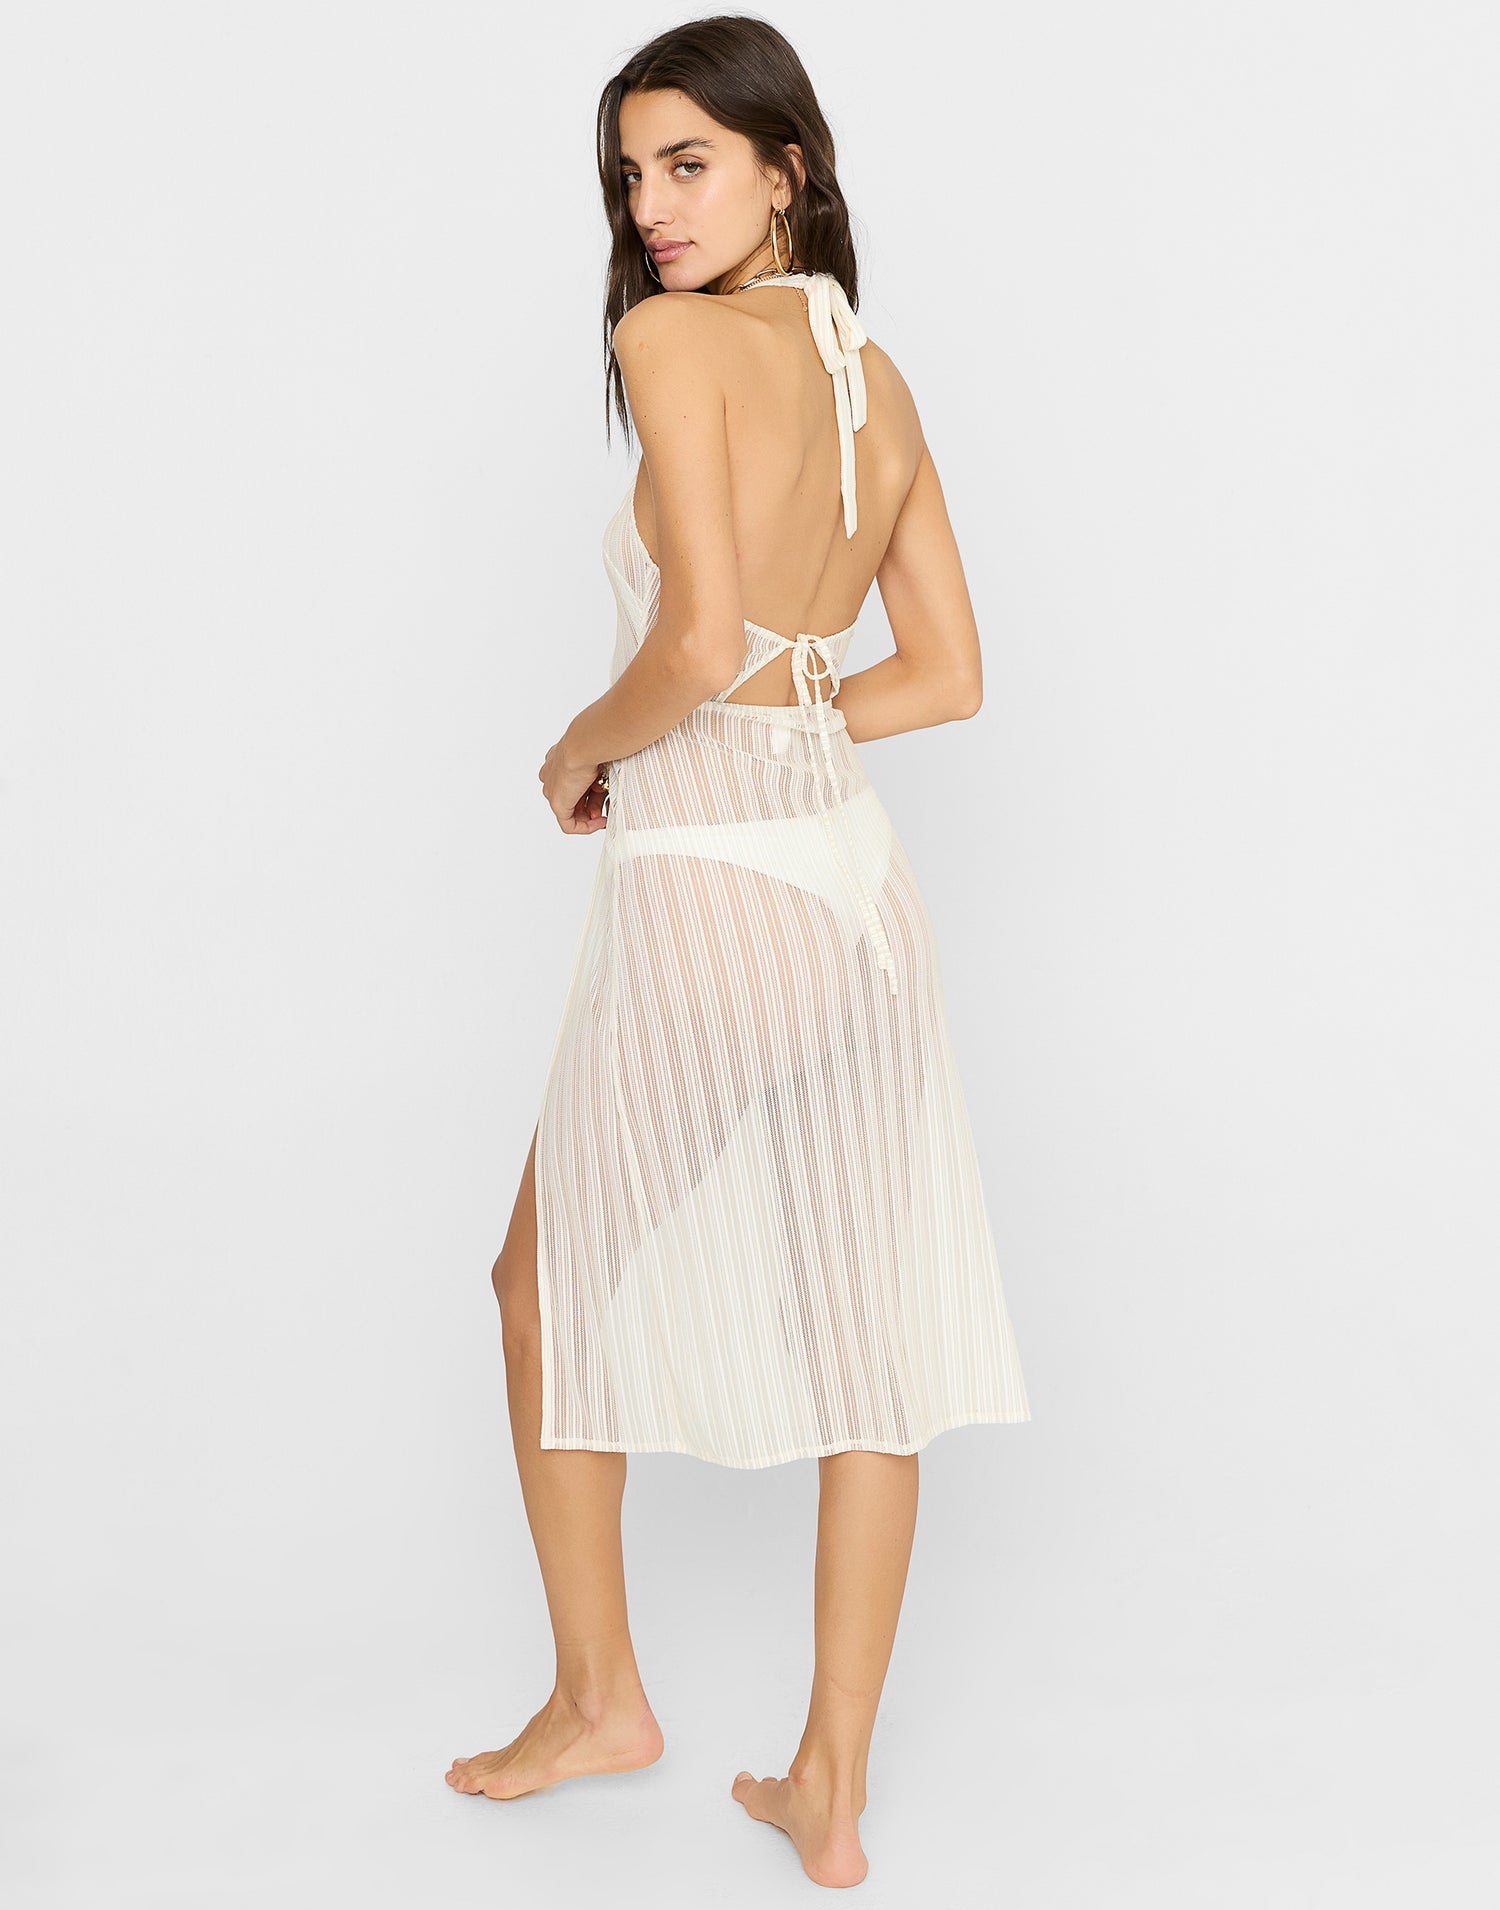 Saddie Mesh Midi Dress Cover Up in White/Gold with Gold Heart Hardware - Back View